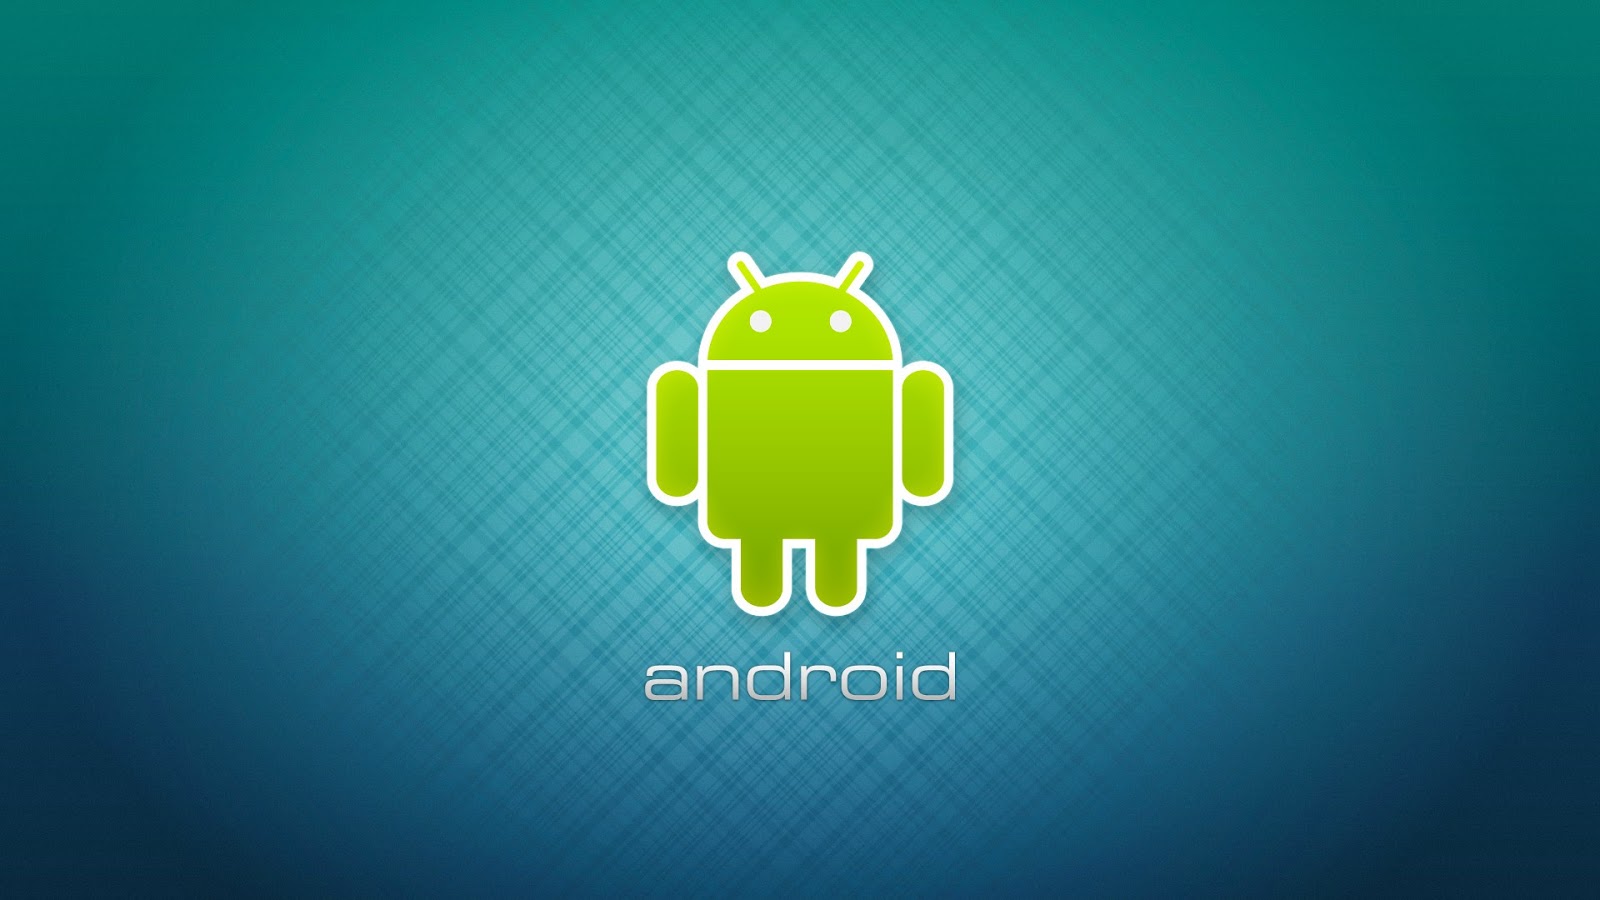 Android Wallpaper HD 1080p